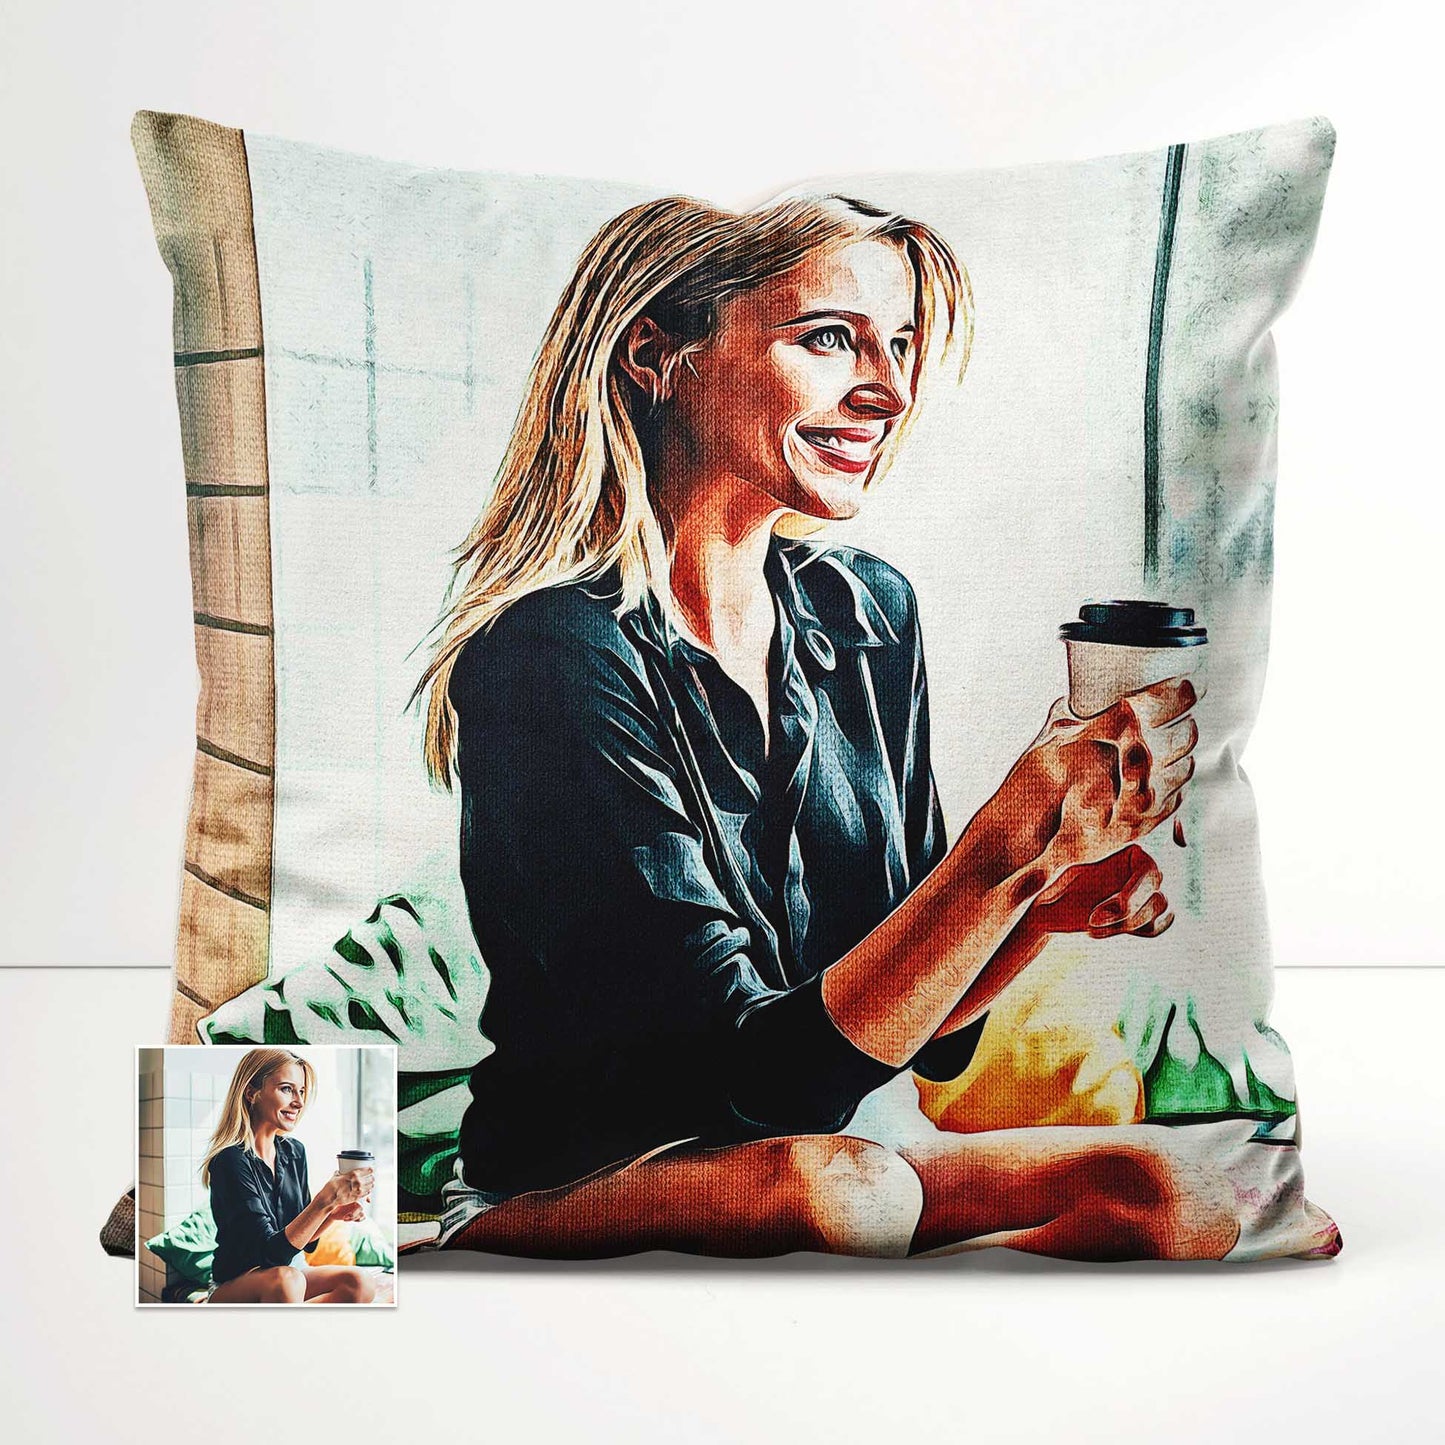 Experience the luxury of the Personalised Original Oil Painting Cushion. Made from soft velvet and adorned with a painting inspired by your photo, this handmade cushion exudes elegance and creativity, cool and chic design